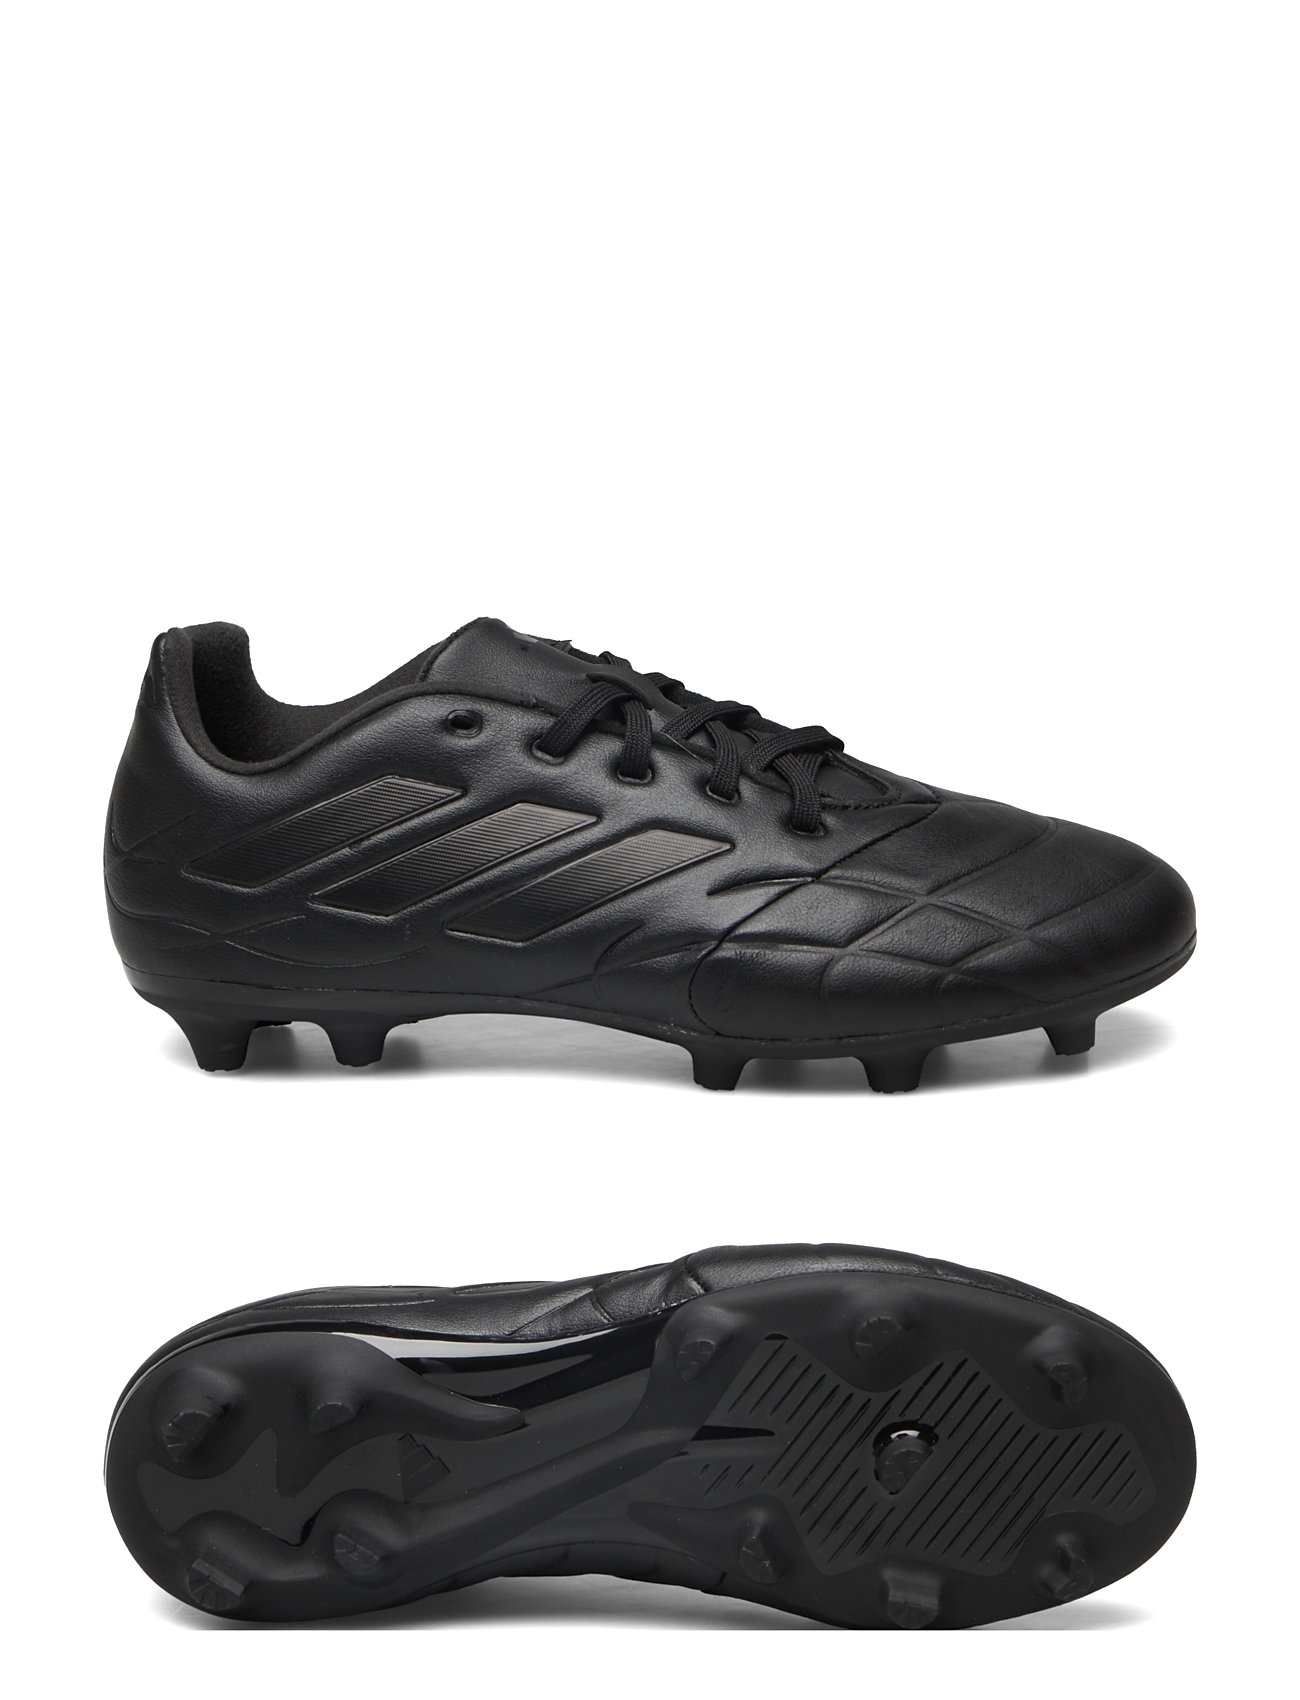 Copa Pure.3 Fg Shoes Sport Shoes Football Boots Black Adidas Performance